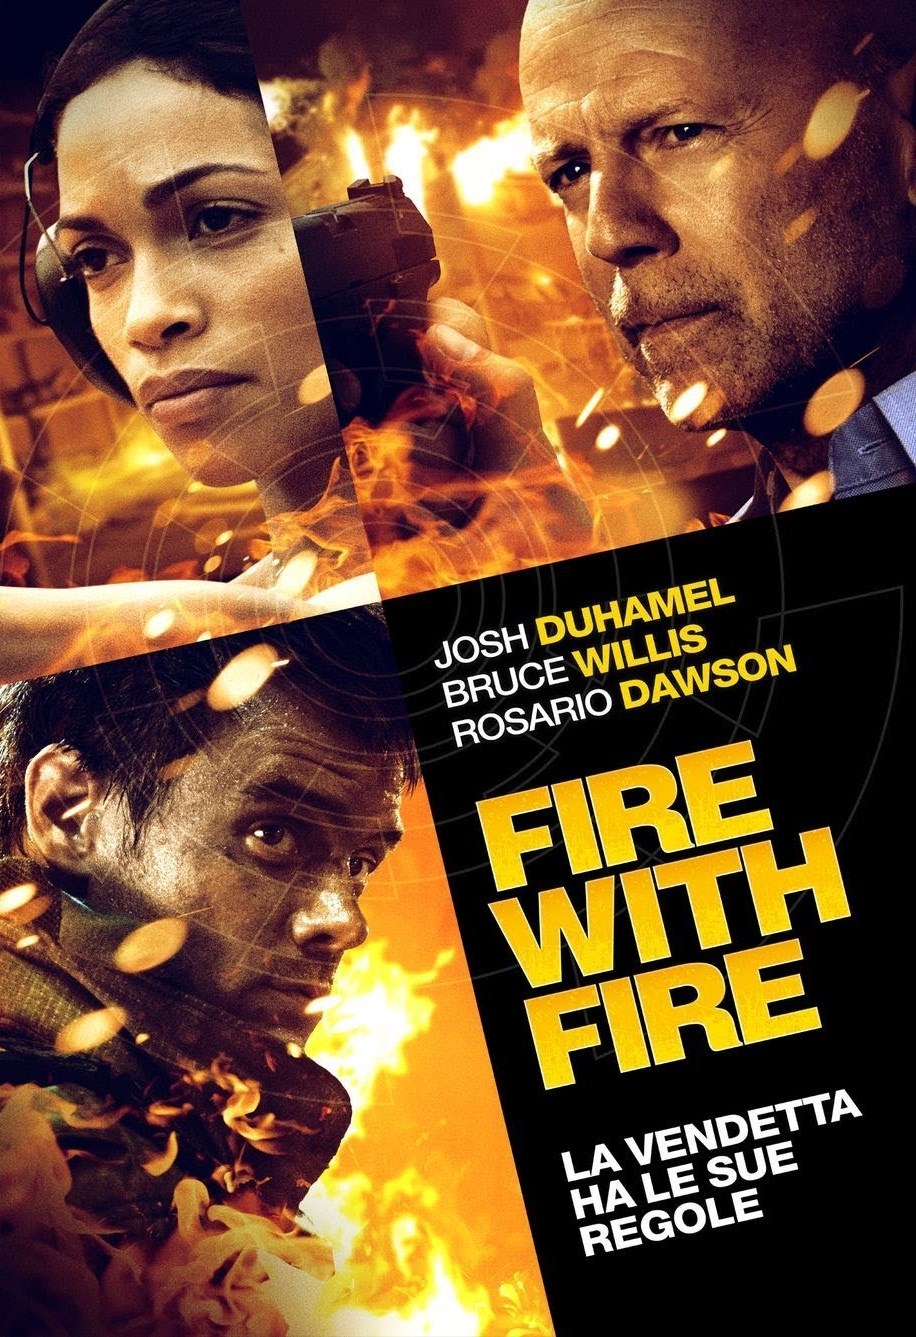 Fire with Fire [HD] (2013)